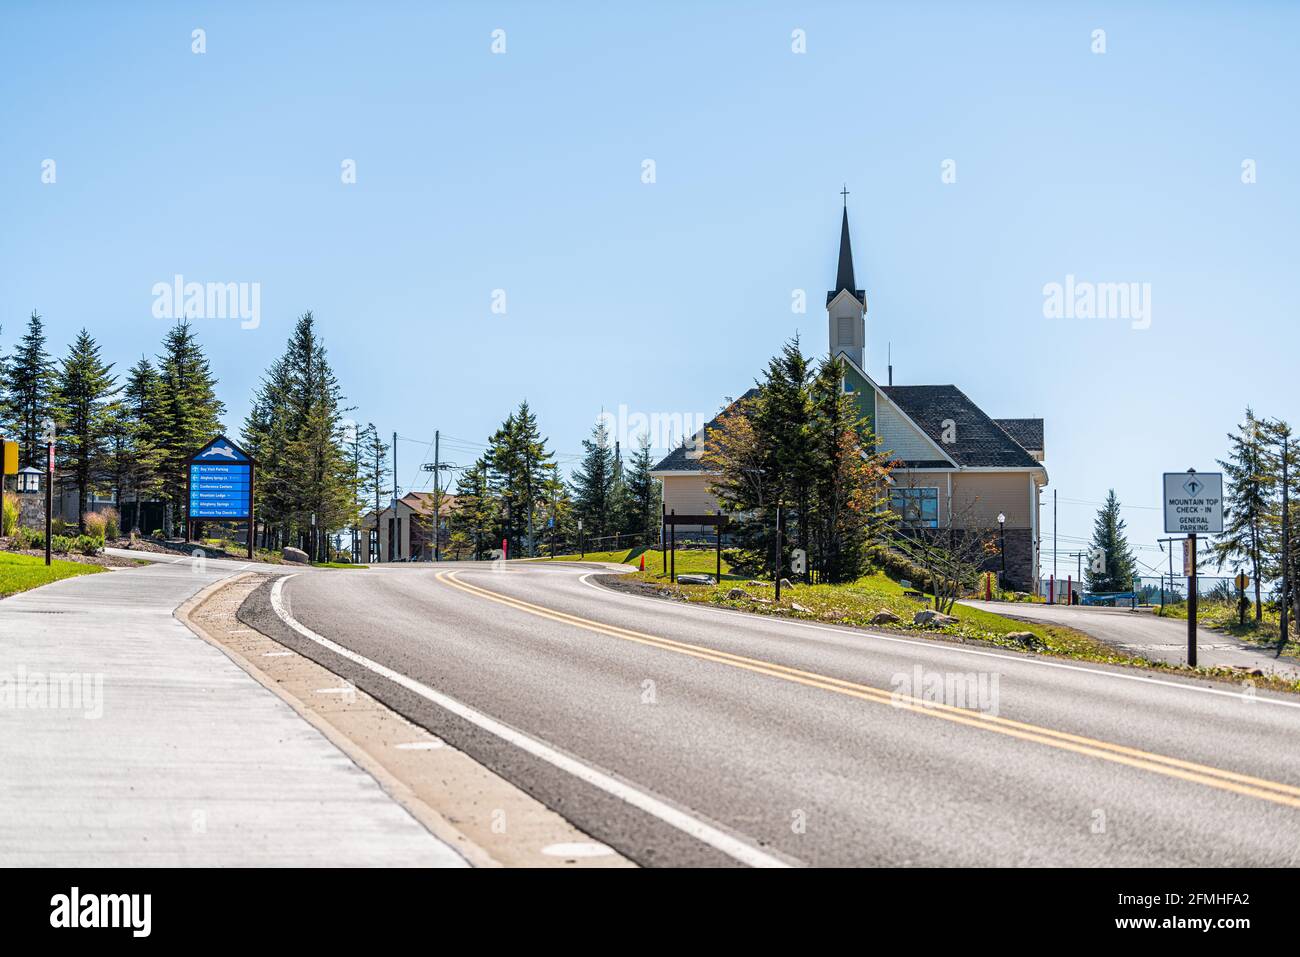 Snowshoe, USA - October 6, 2020: St Bernard chapel wooden church with view on main street sidewalk in small ski resort town village in West Virginia Stock Photo